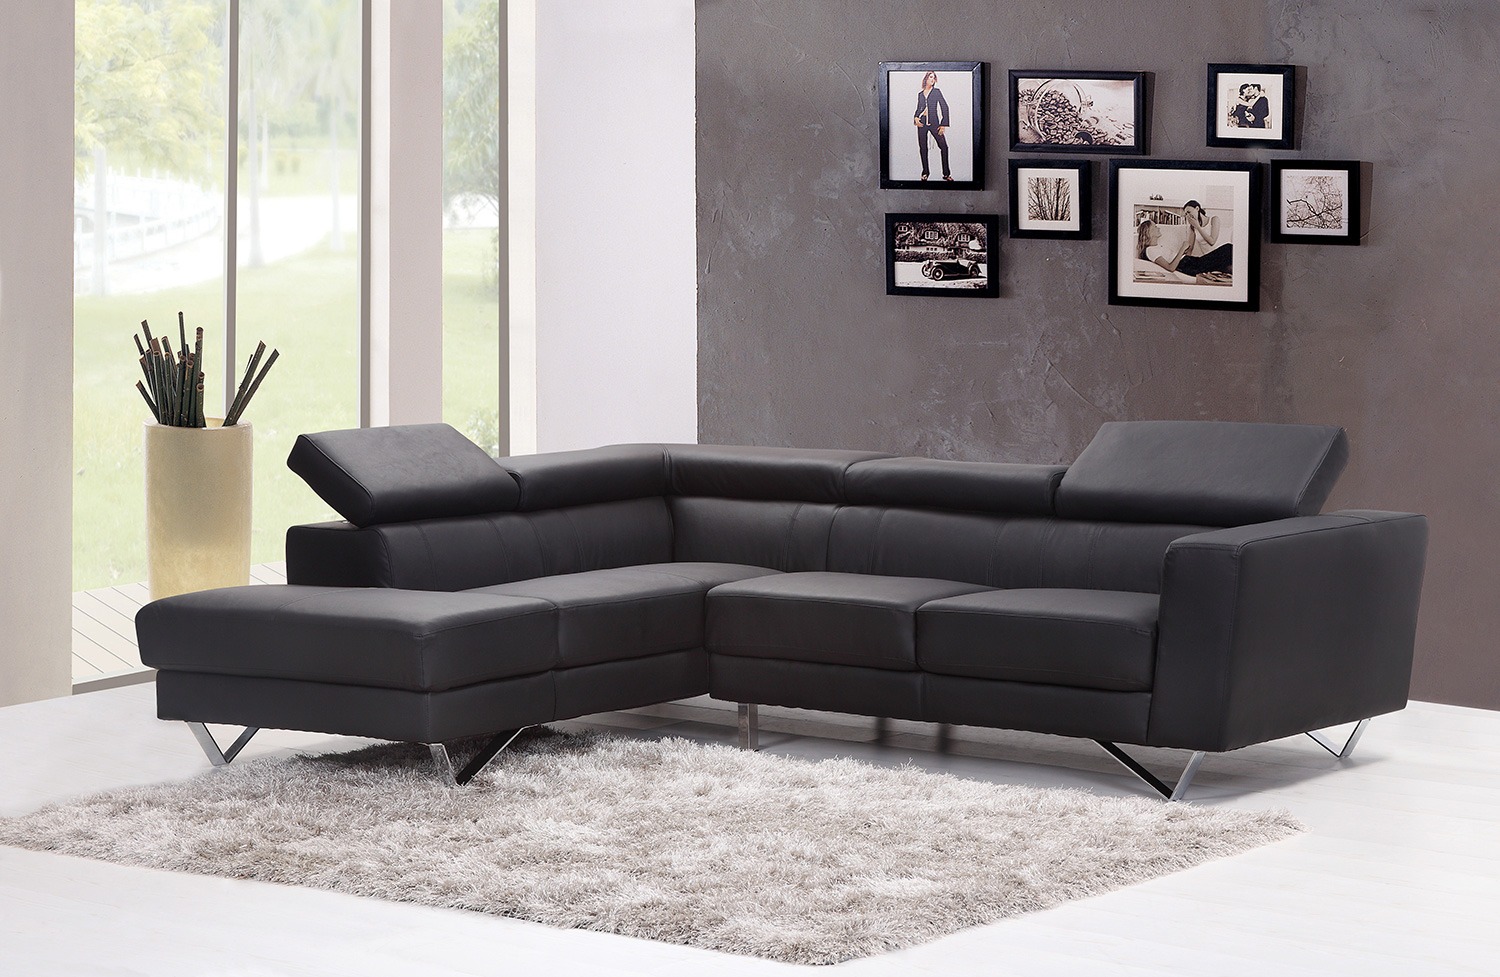 Photo of a modern black couch